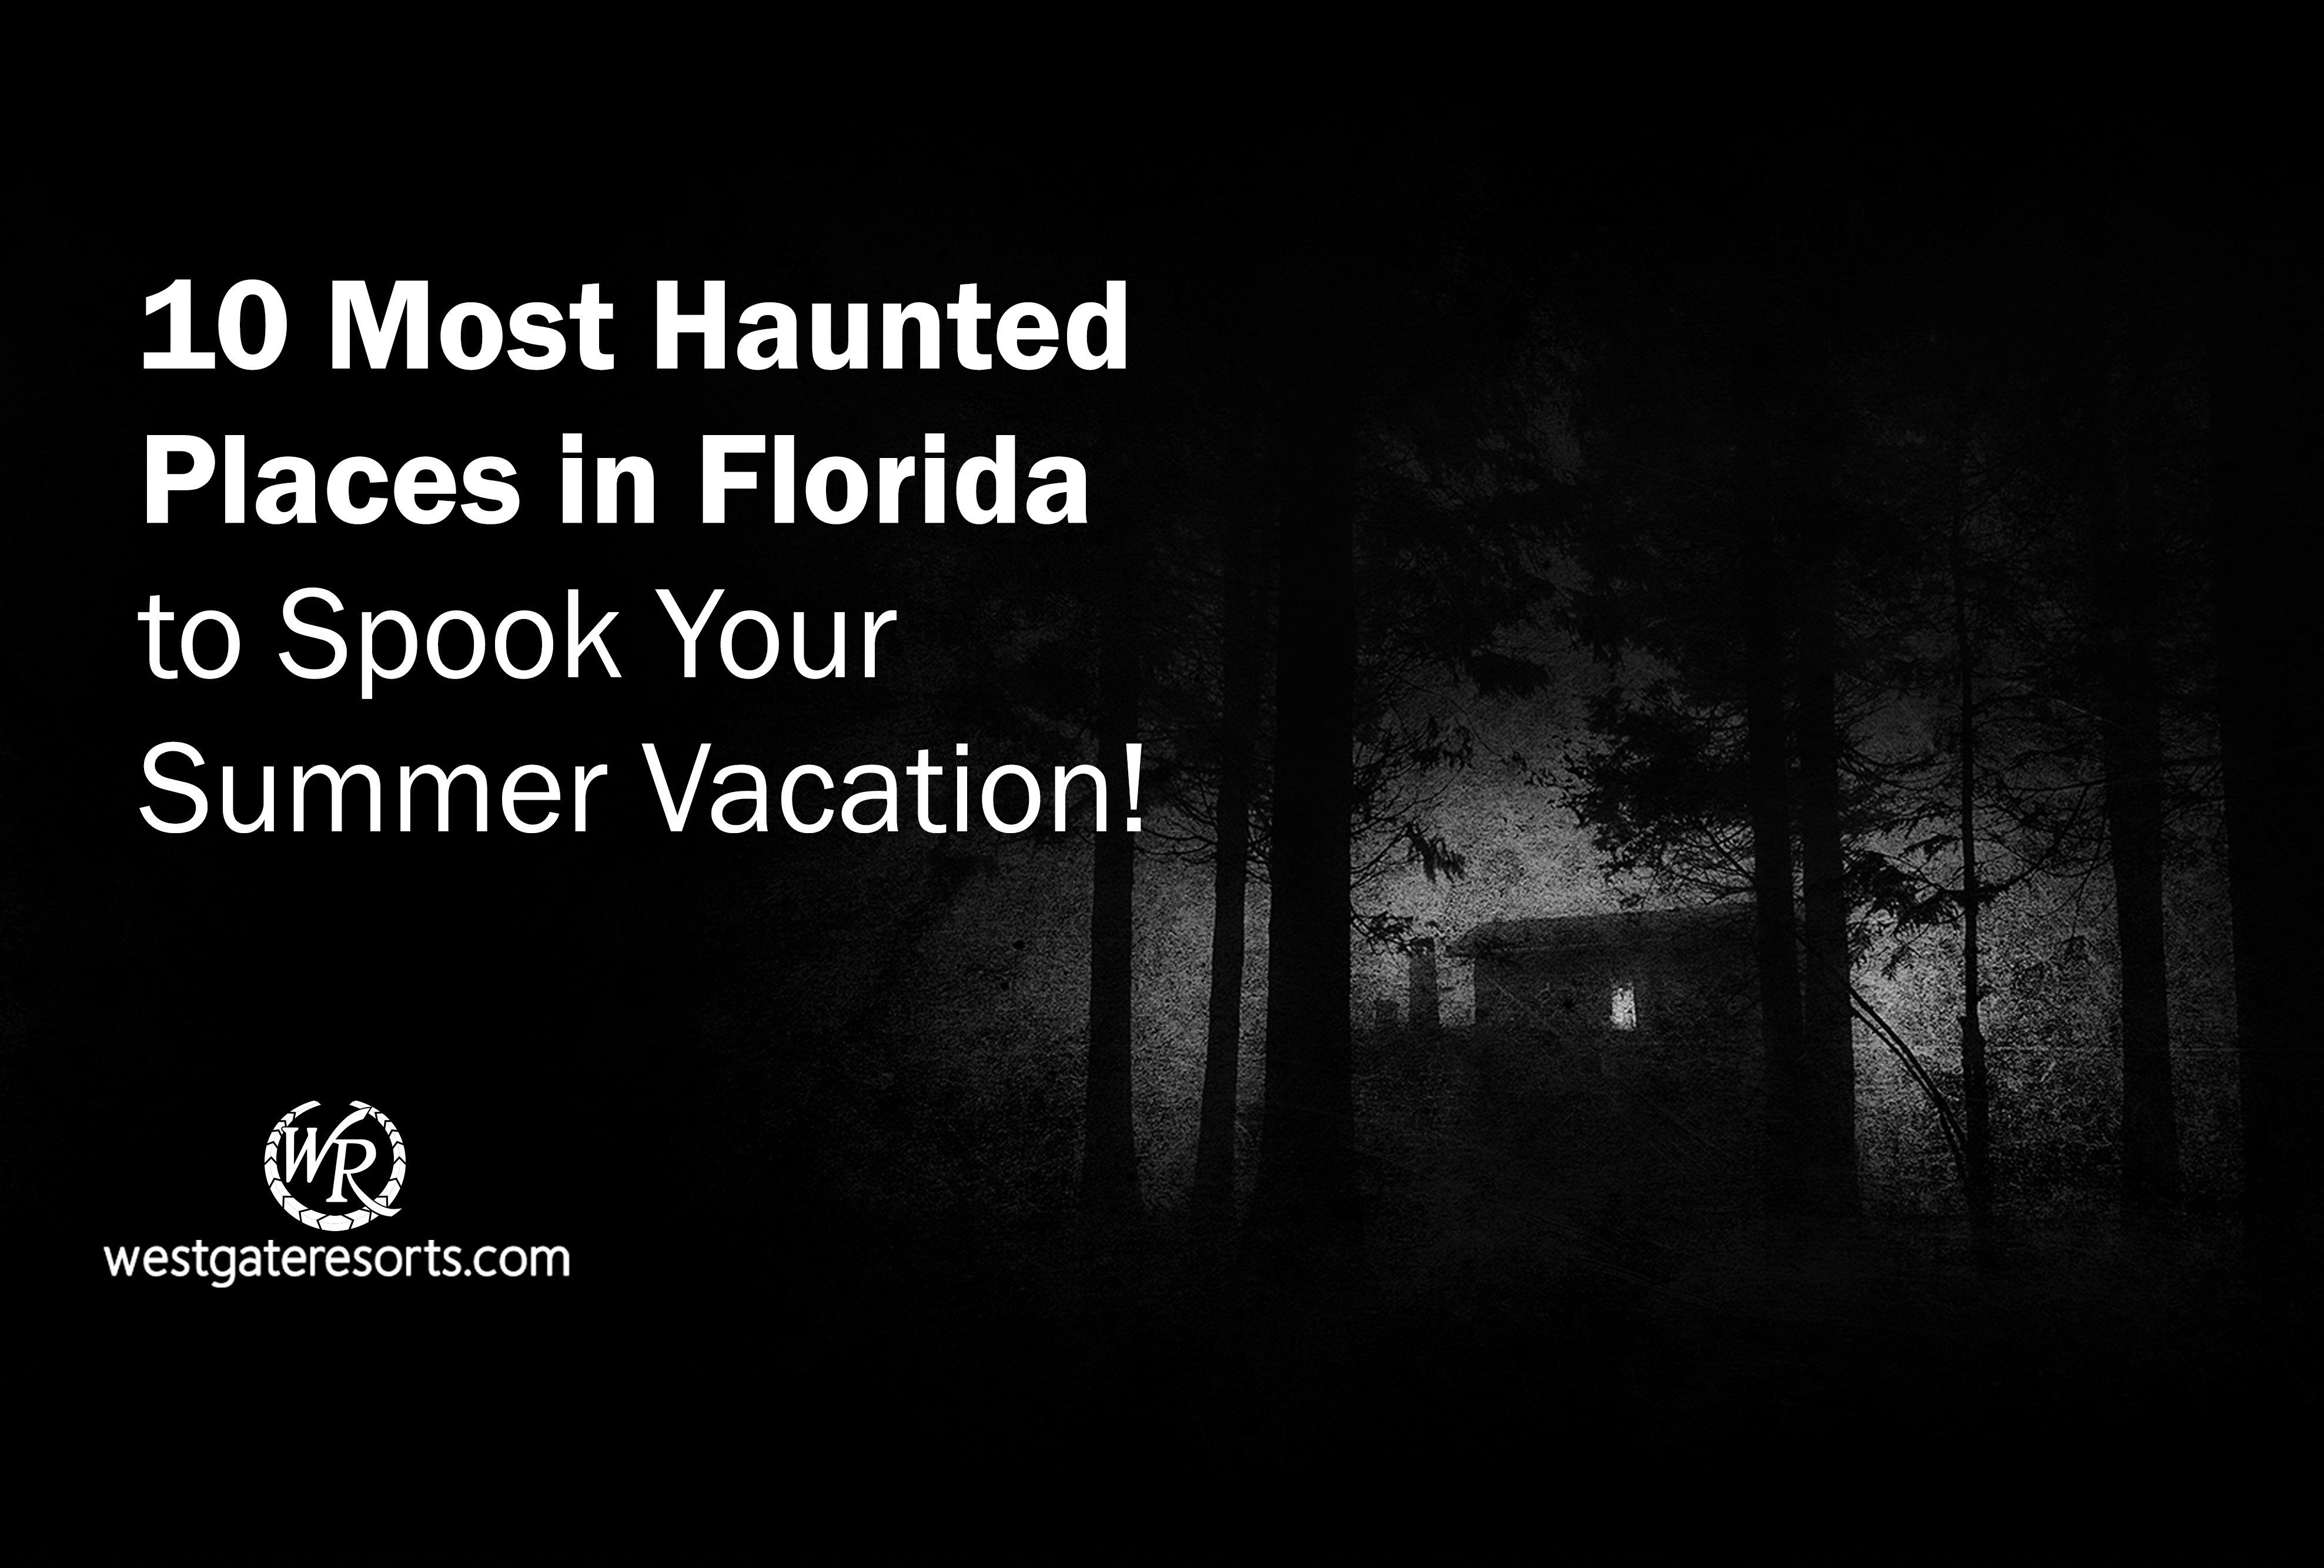 What Are The Top Signs Of A Haunted Location?